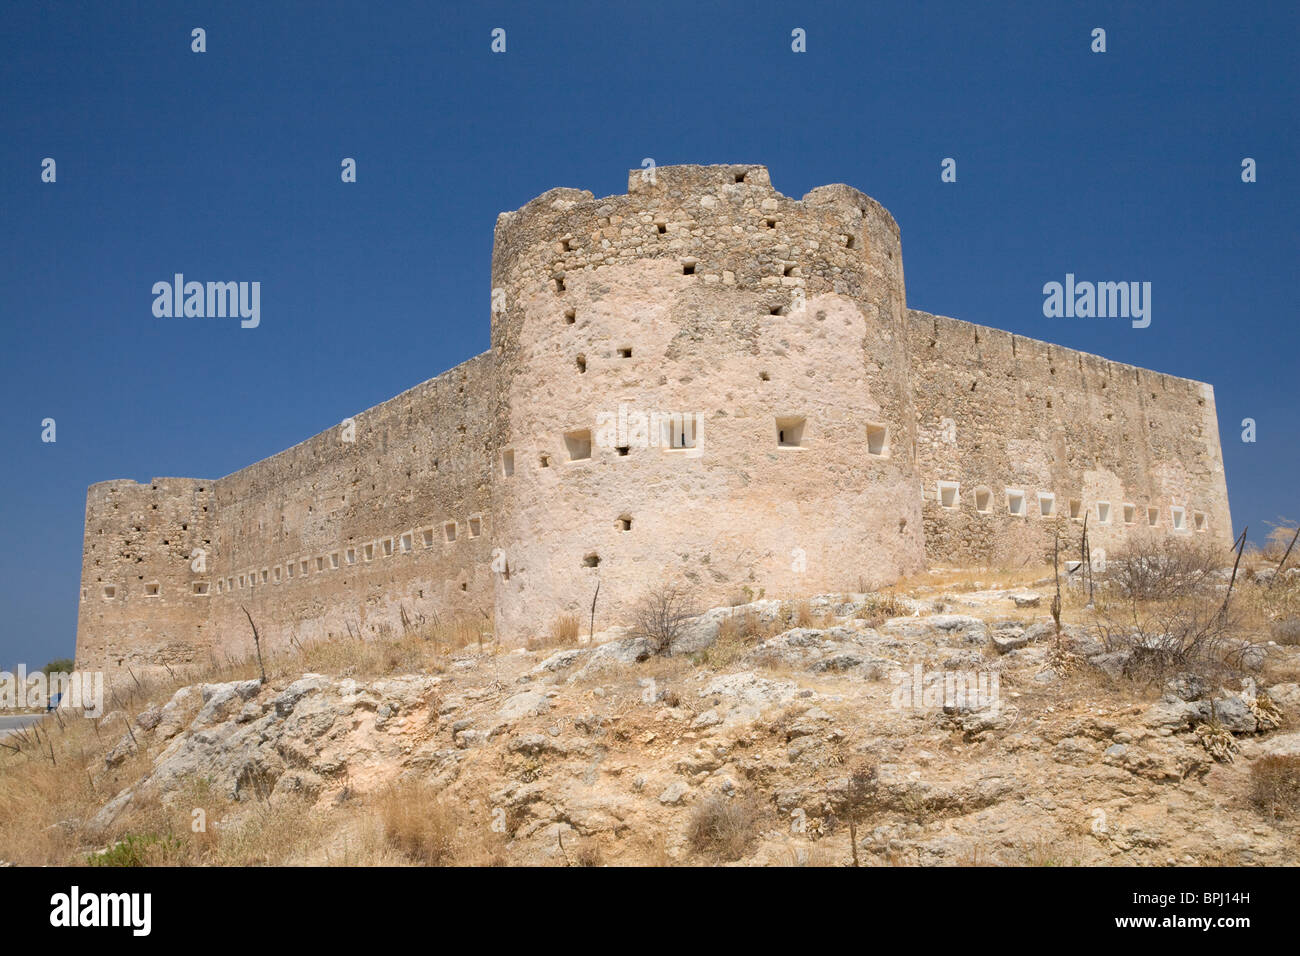 Turkish fortress at the Aptera ancient ruins, Crete, Greece Stock Photo